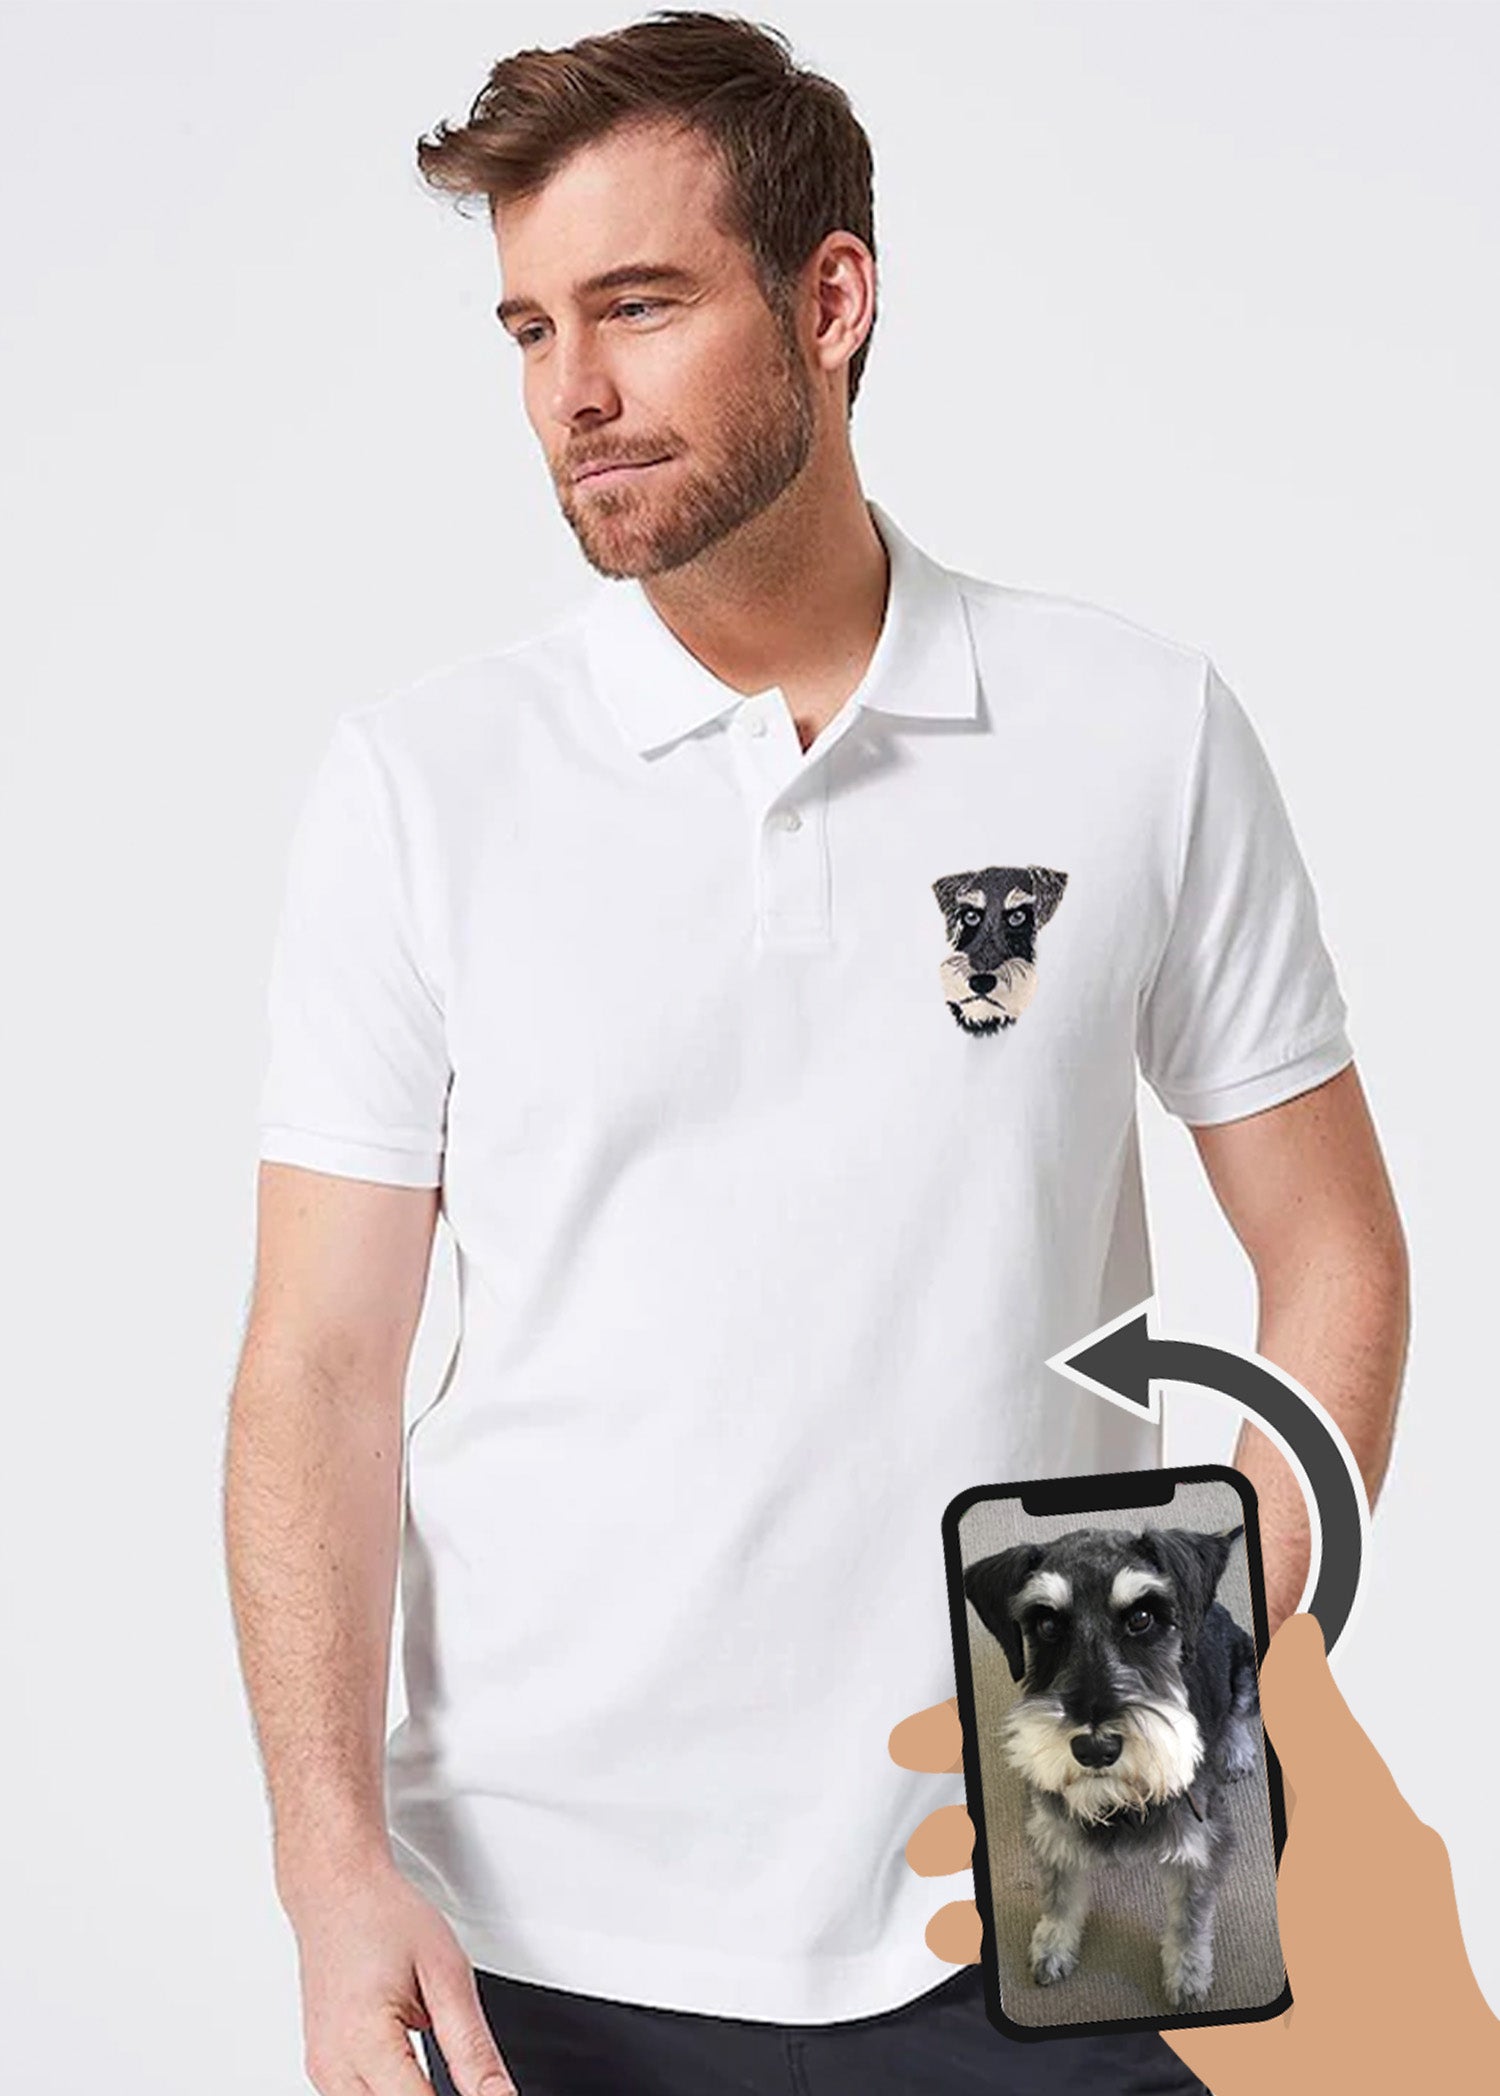 Custom Pet Embroidery - Men's Polo Shirt (NEXT-DAY prod. avail. at checkout) (Dog or Cat only)